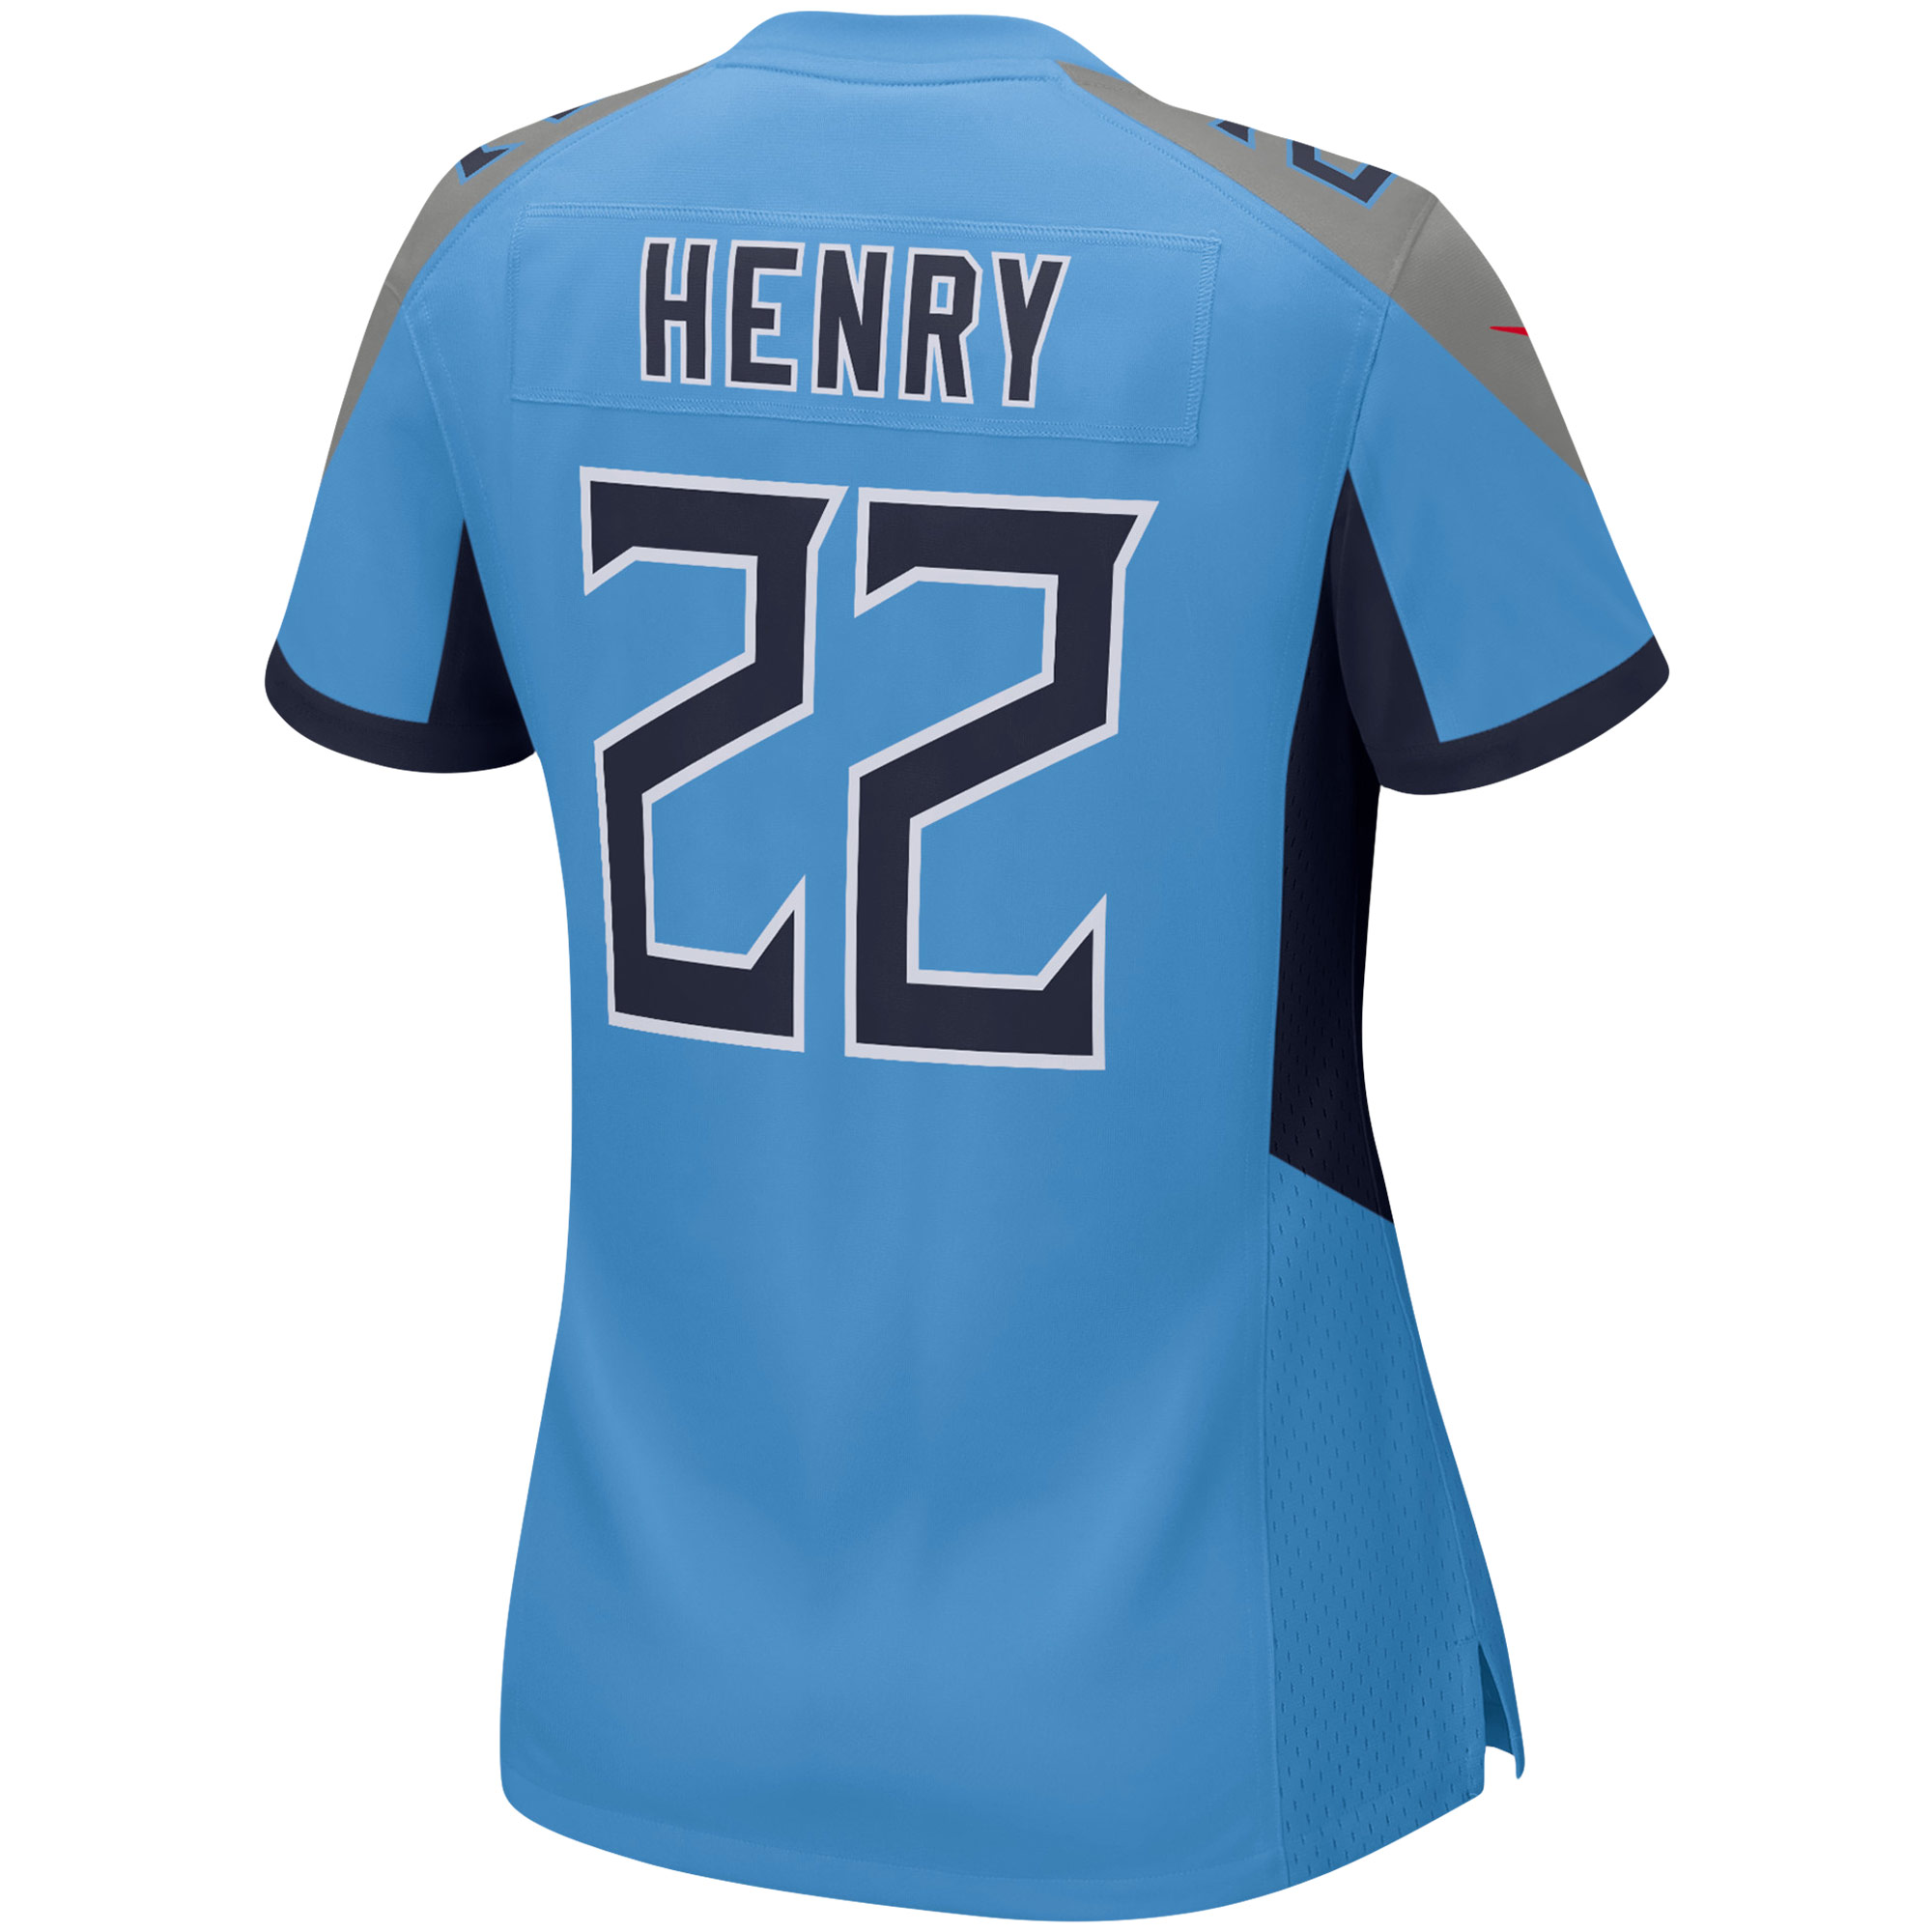 Women's Nike Derrick Henry Light Blue Tennessee Titans Game Jersey - image 3 of 3